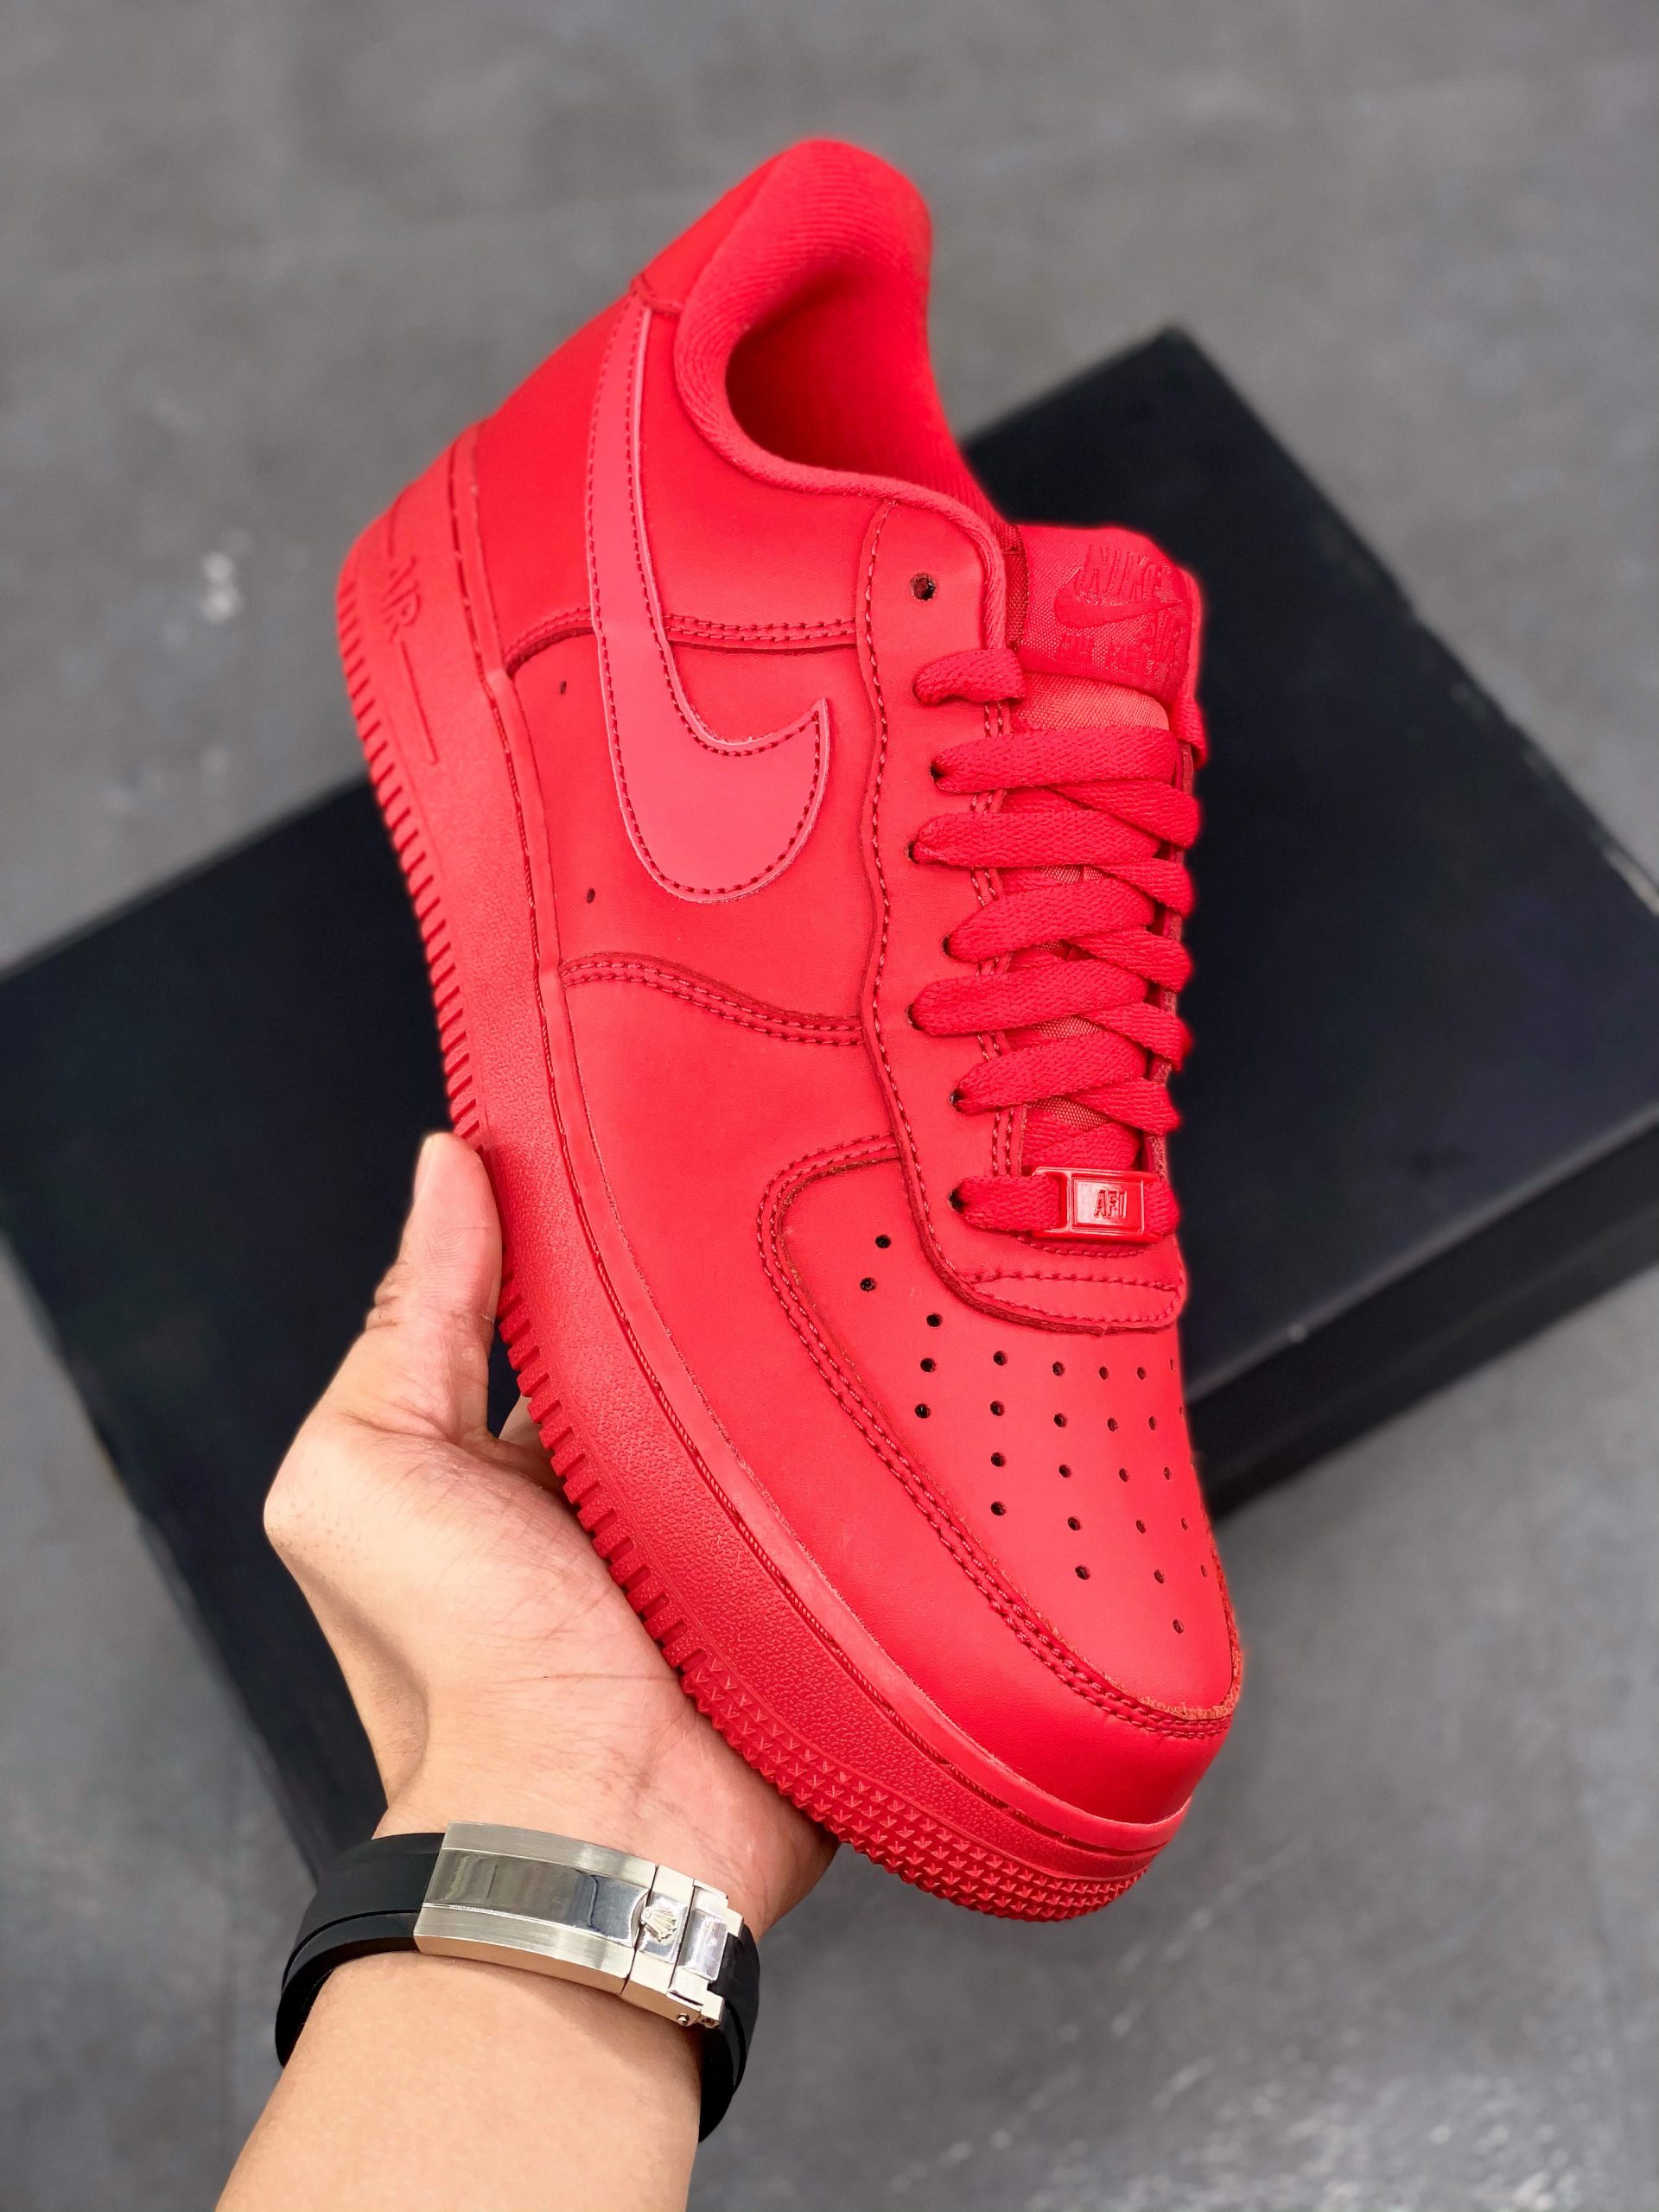 Nike Air AF Force 1 Low "Triple Red" CW6999-600 Shoes